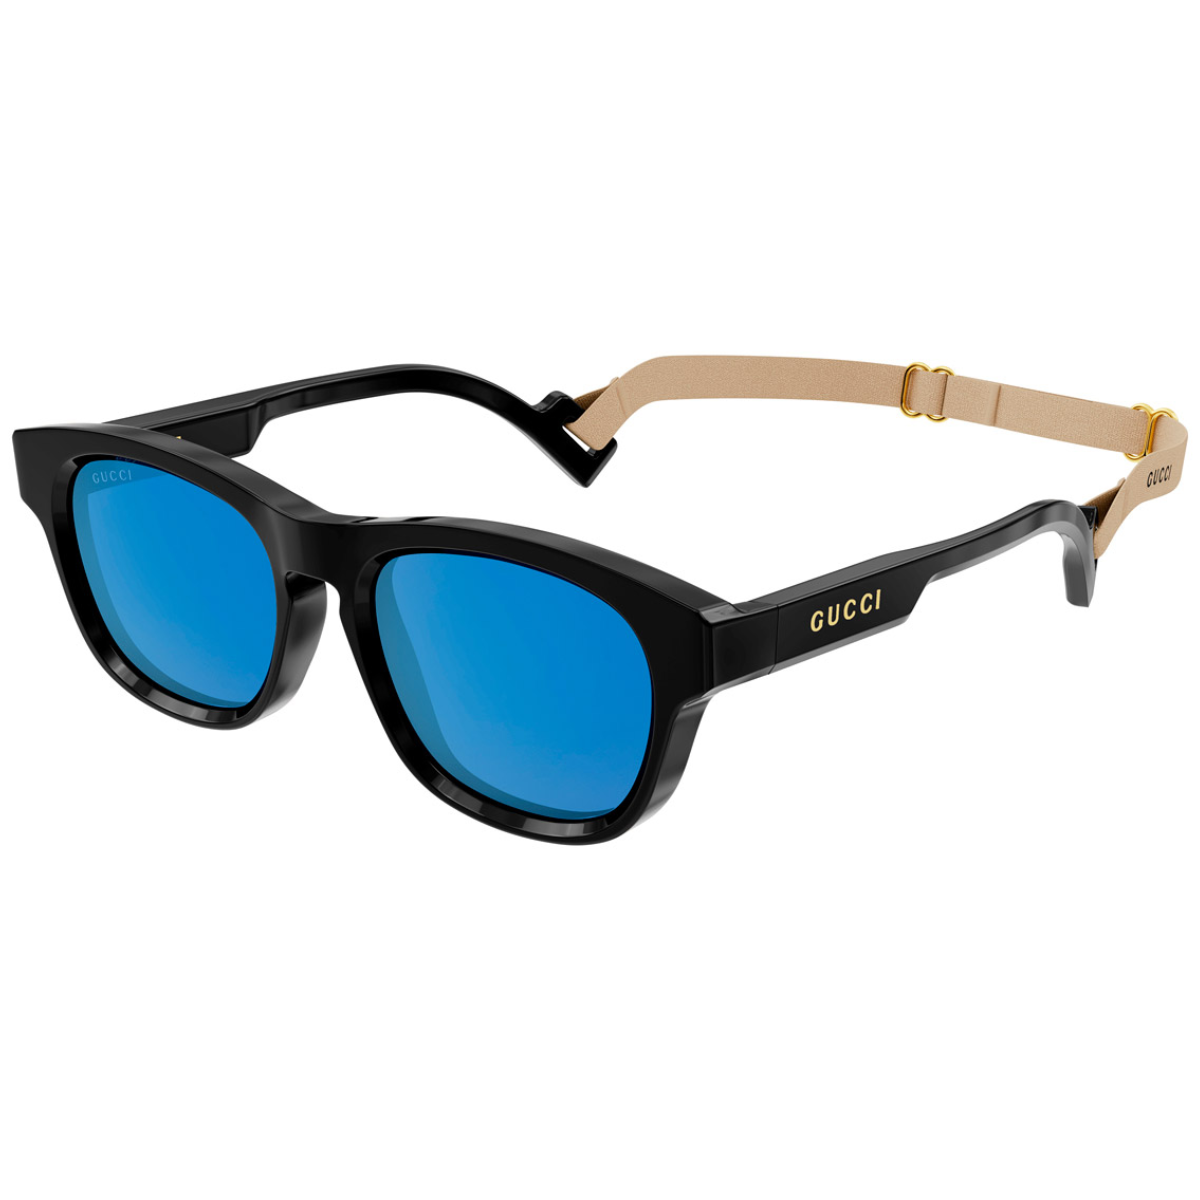 Gucci Shades: Fashionable Sun Protection (Model: 1238S)